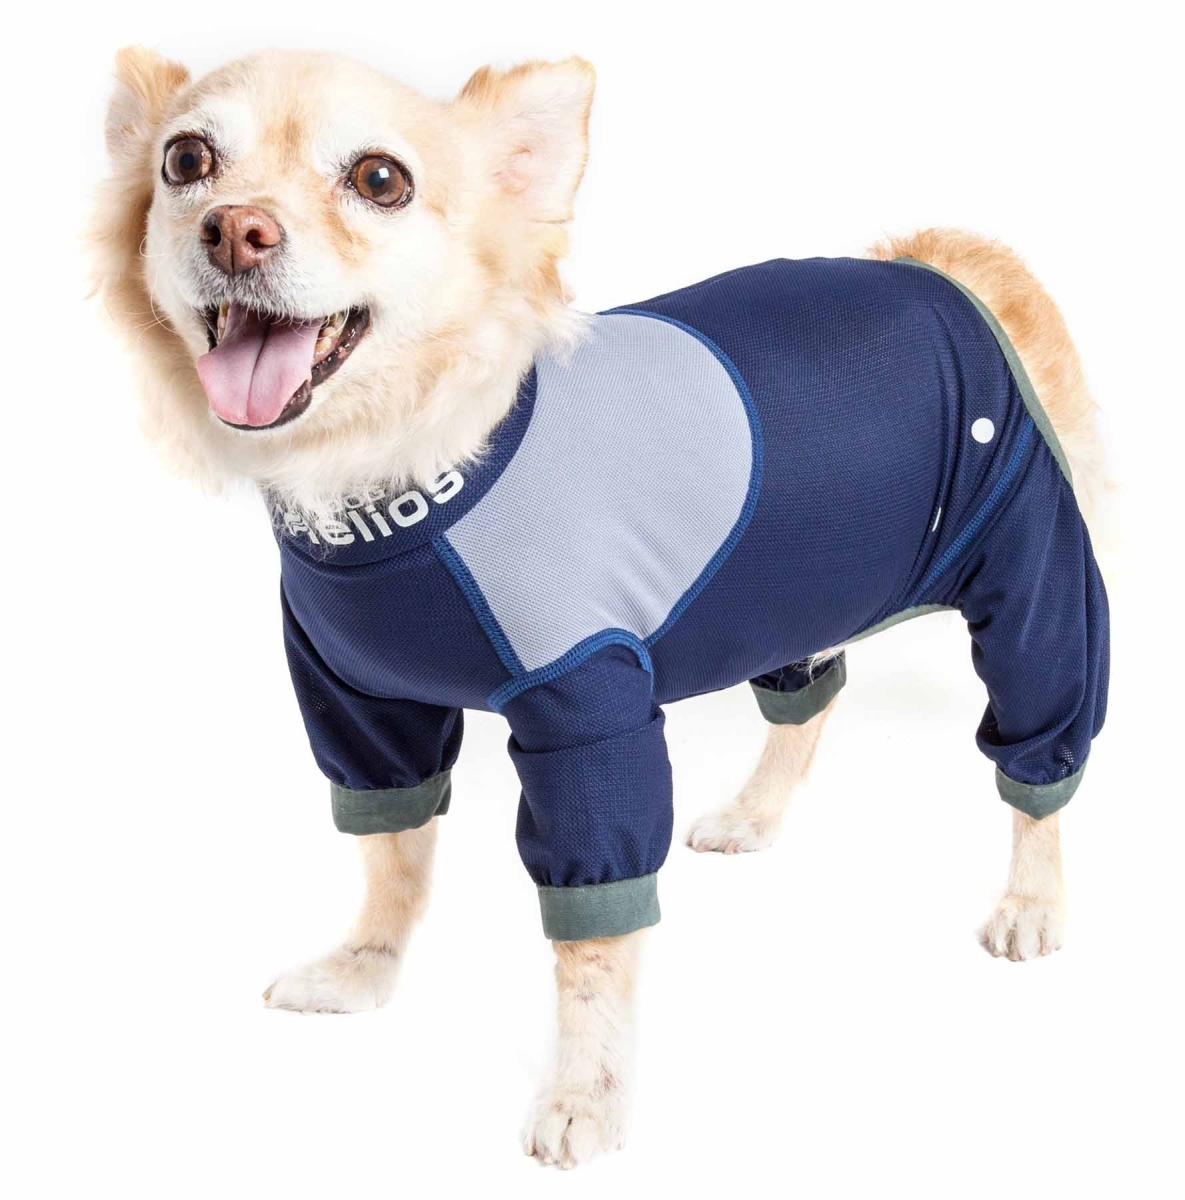 Yghl9blmd Tail Runner 4-way-stretch Breathable Full Bodied Performance Dog Track Suit - Blue & Grey, Medium